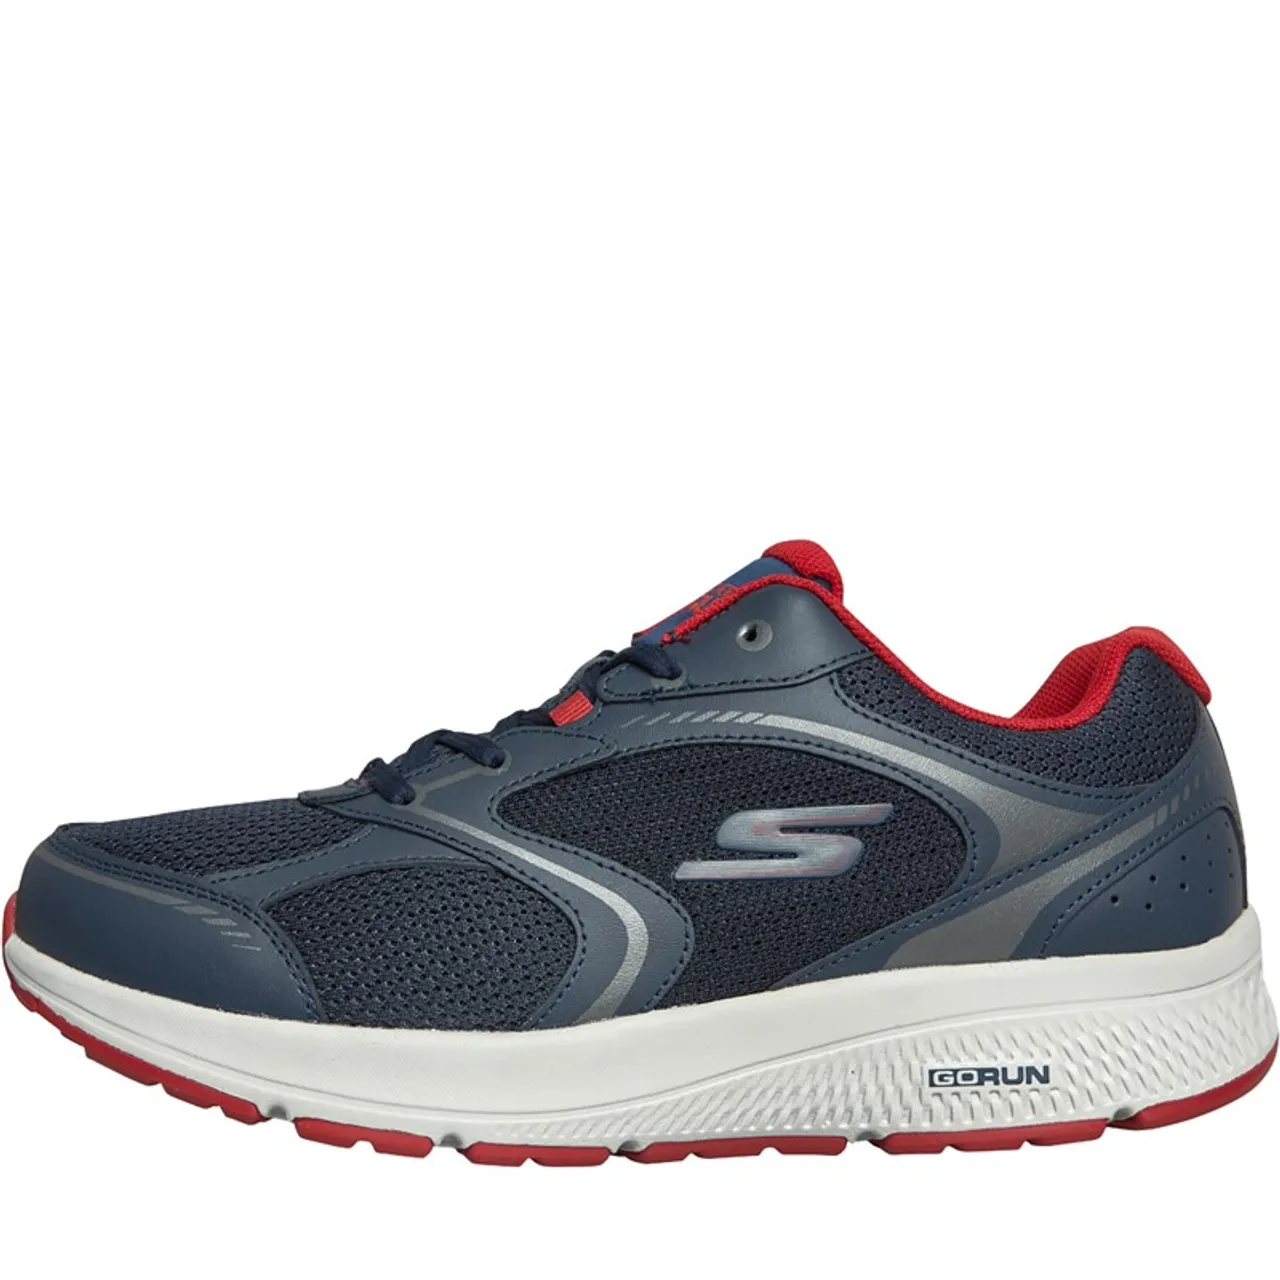 SKECHERS Mens Go Run Consistent Specie Neutral Running Shoes Navy/Red